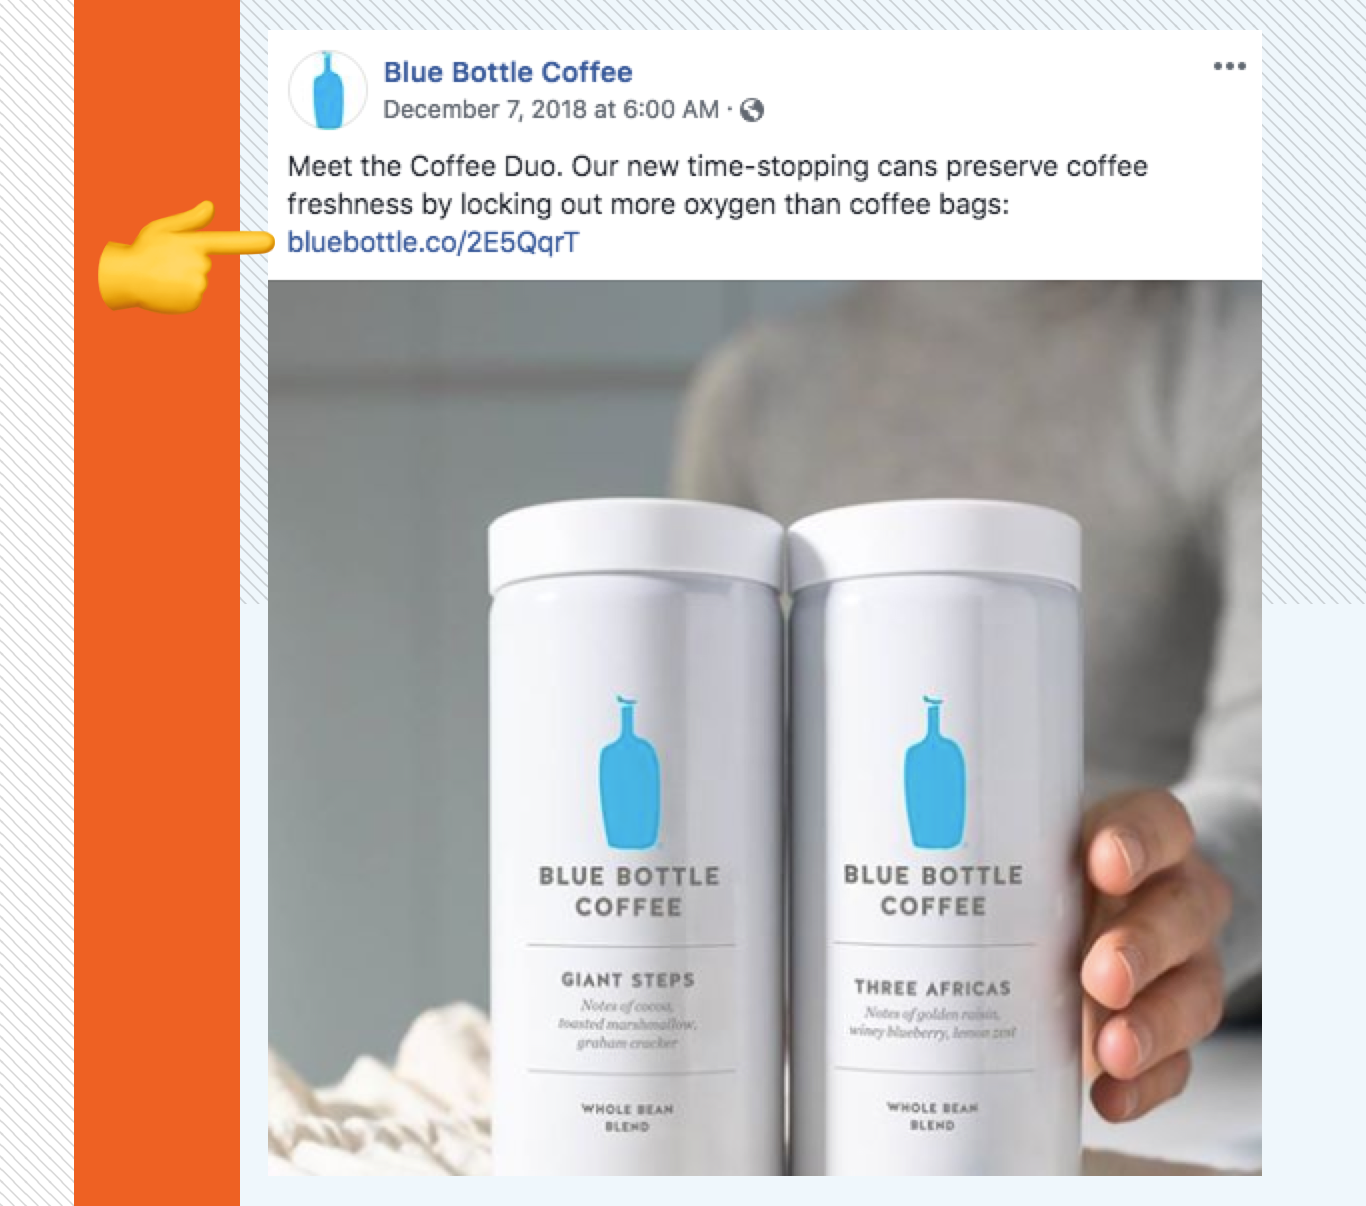 A screenshot of a Blue Bottle Facebook post showing two whole bean blends